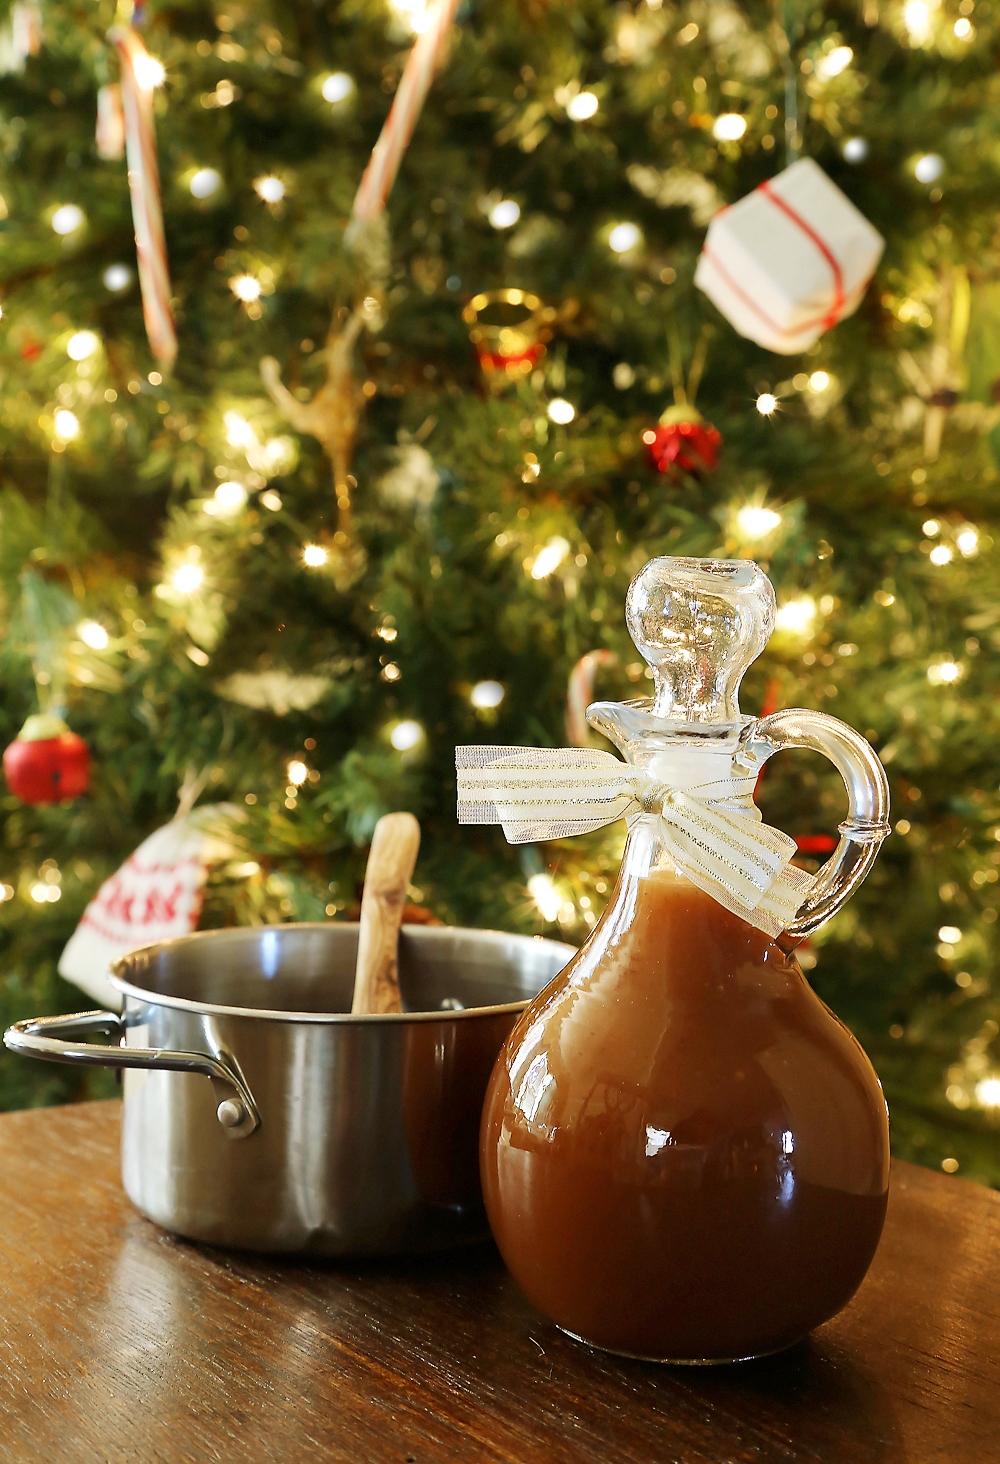 Easy Homemade Apple Cider Syrup – Velvety rich, cinnamon-spiced syrup is perfect on hot pancakes, waffles or French toast. Use in any recipe that calls for maple syrup + give as gifts! Thecomfortofcooking.com